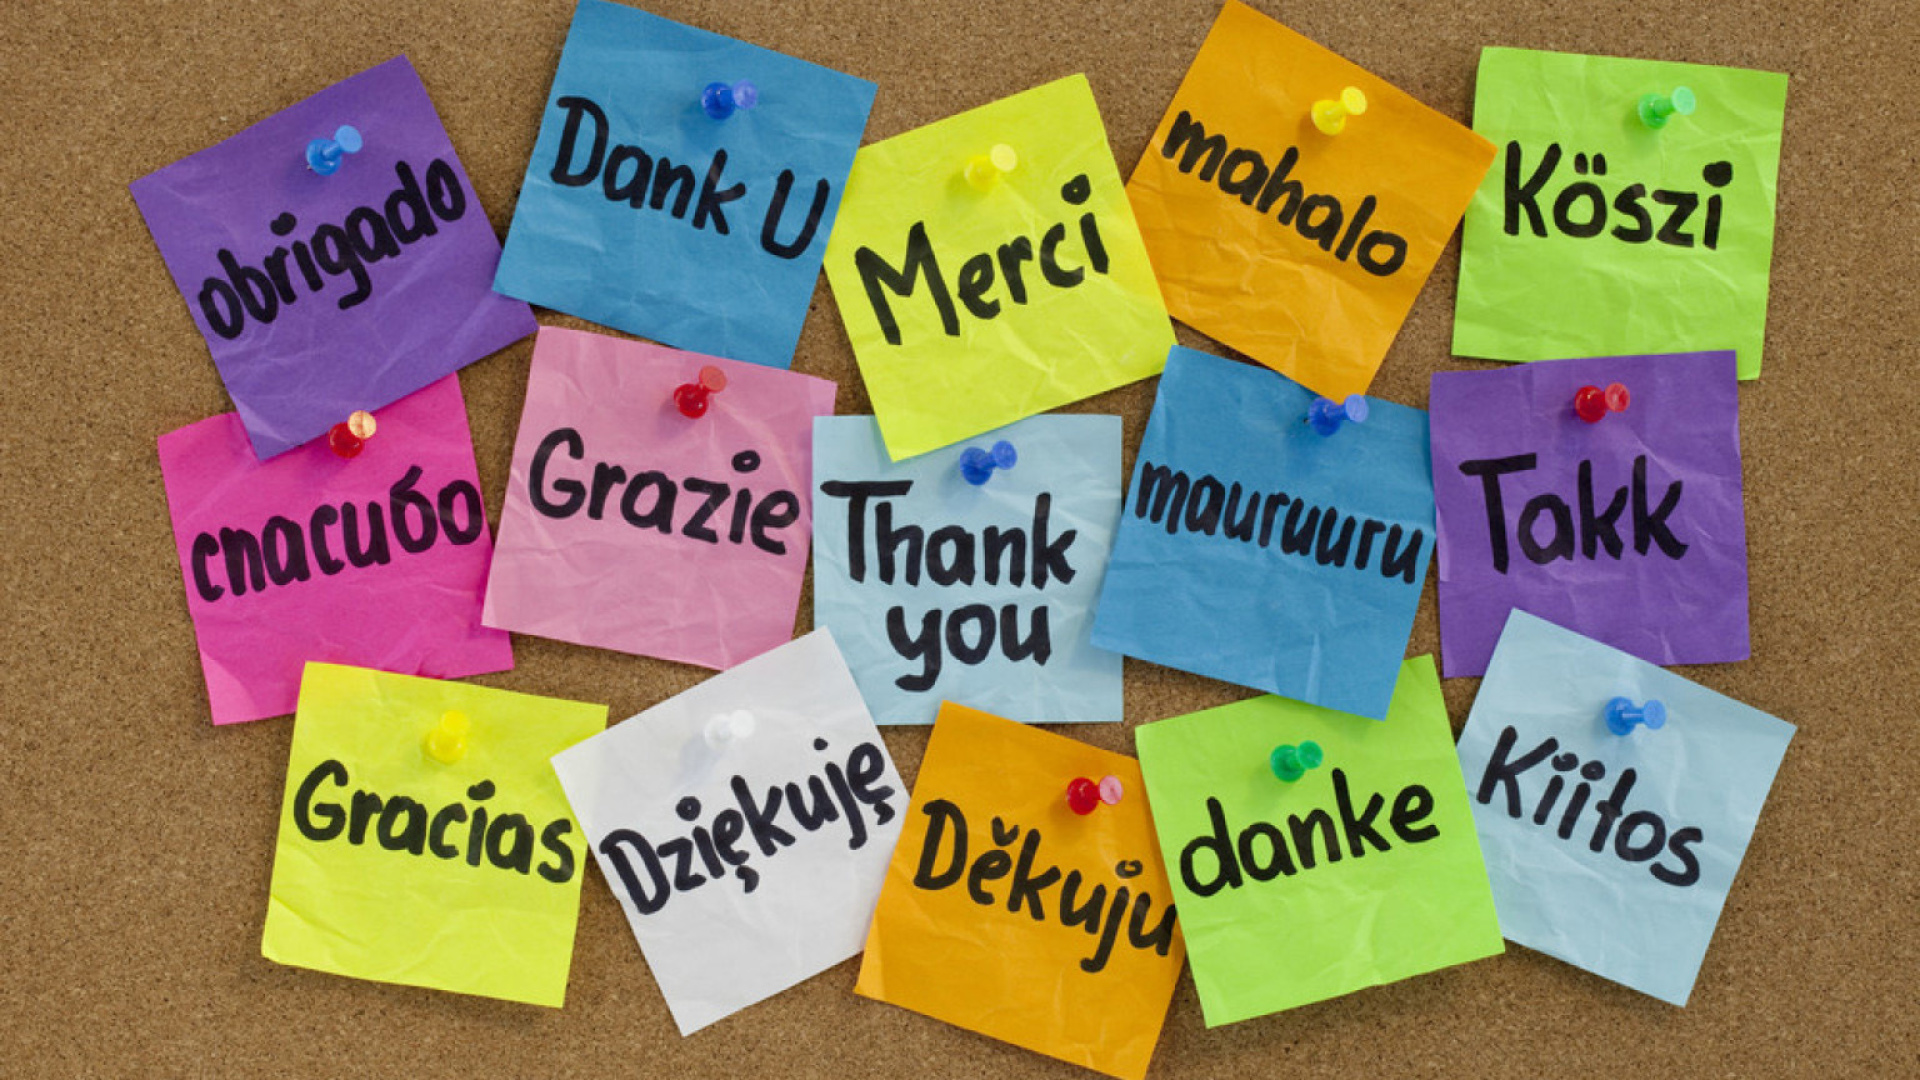 How To Say Thank You in Different Languages wallpaper 1920x1080